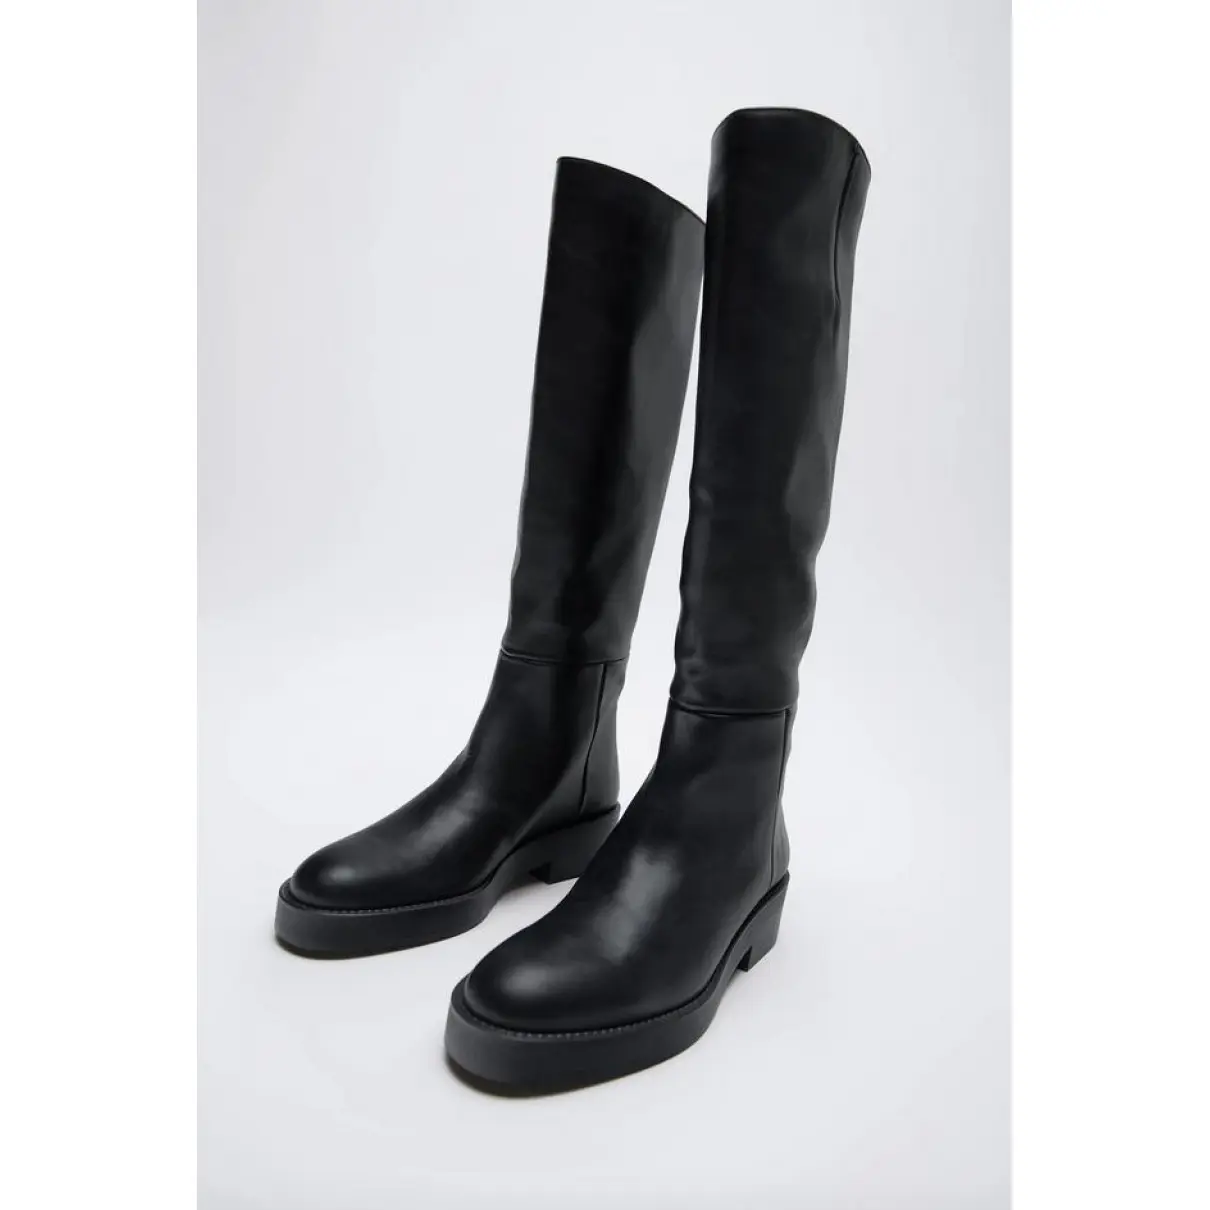 Buy Zara Leather riding boots online